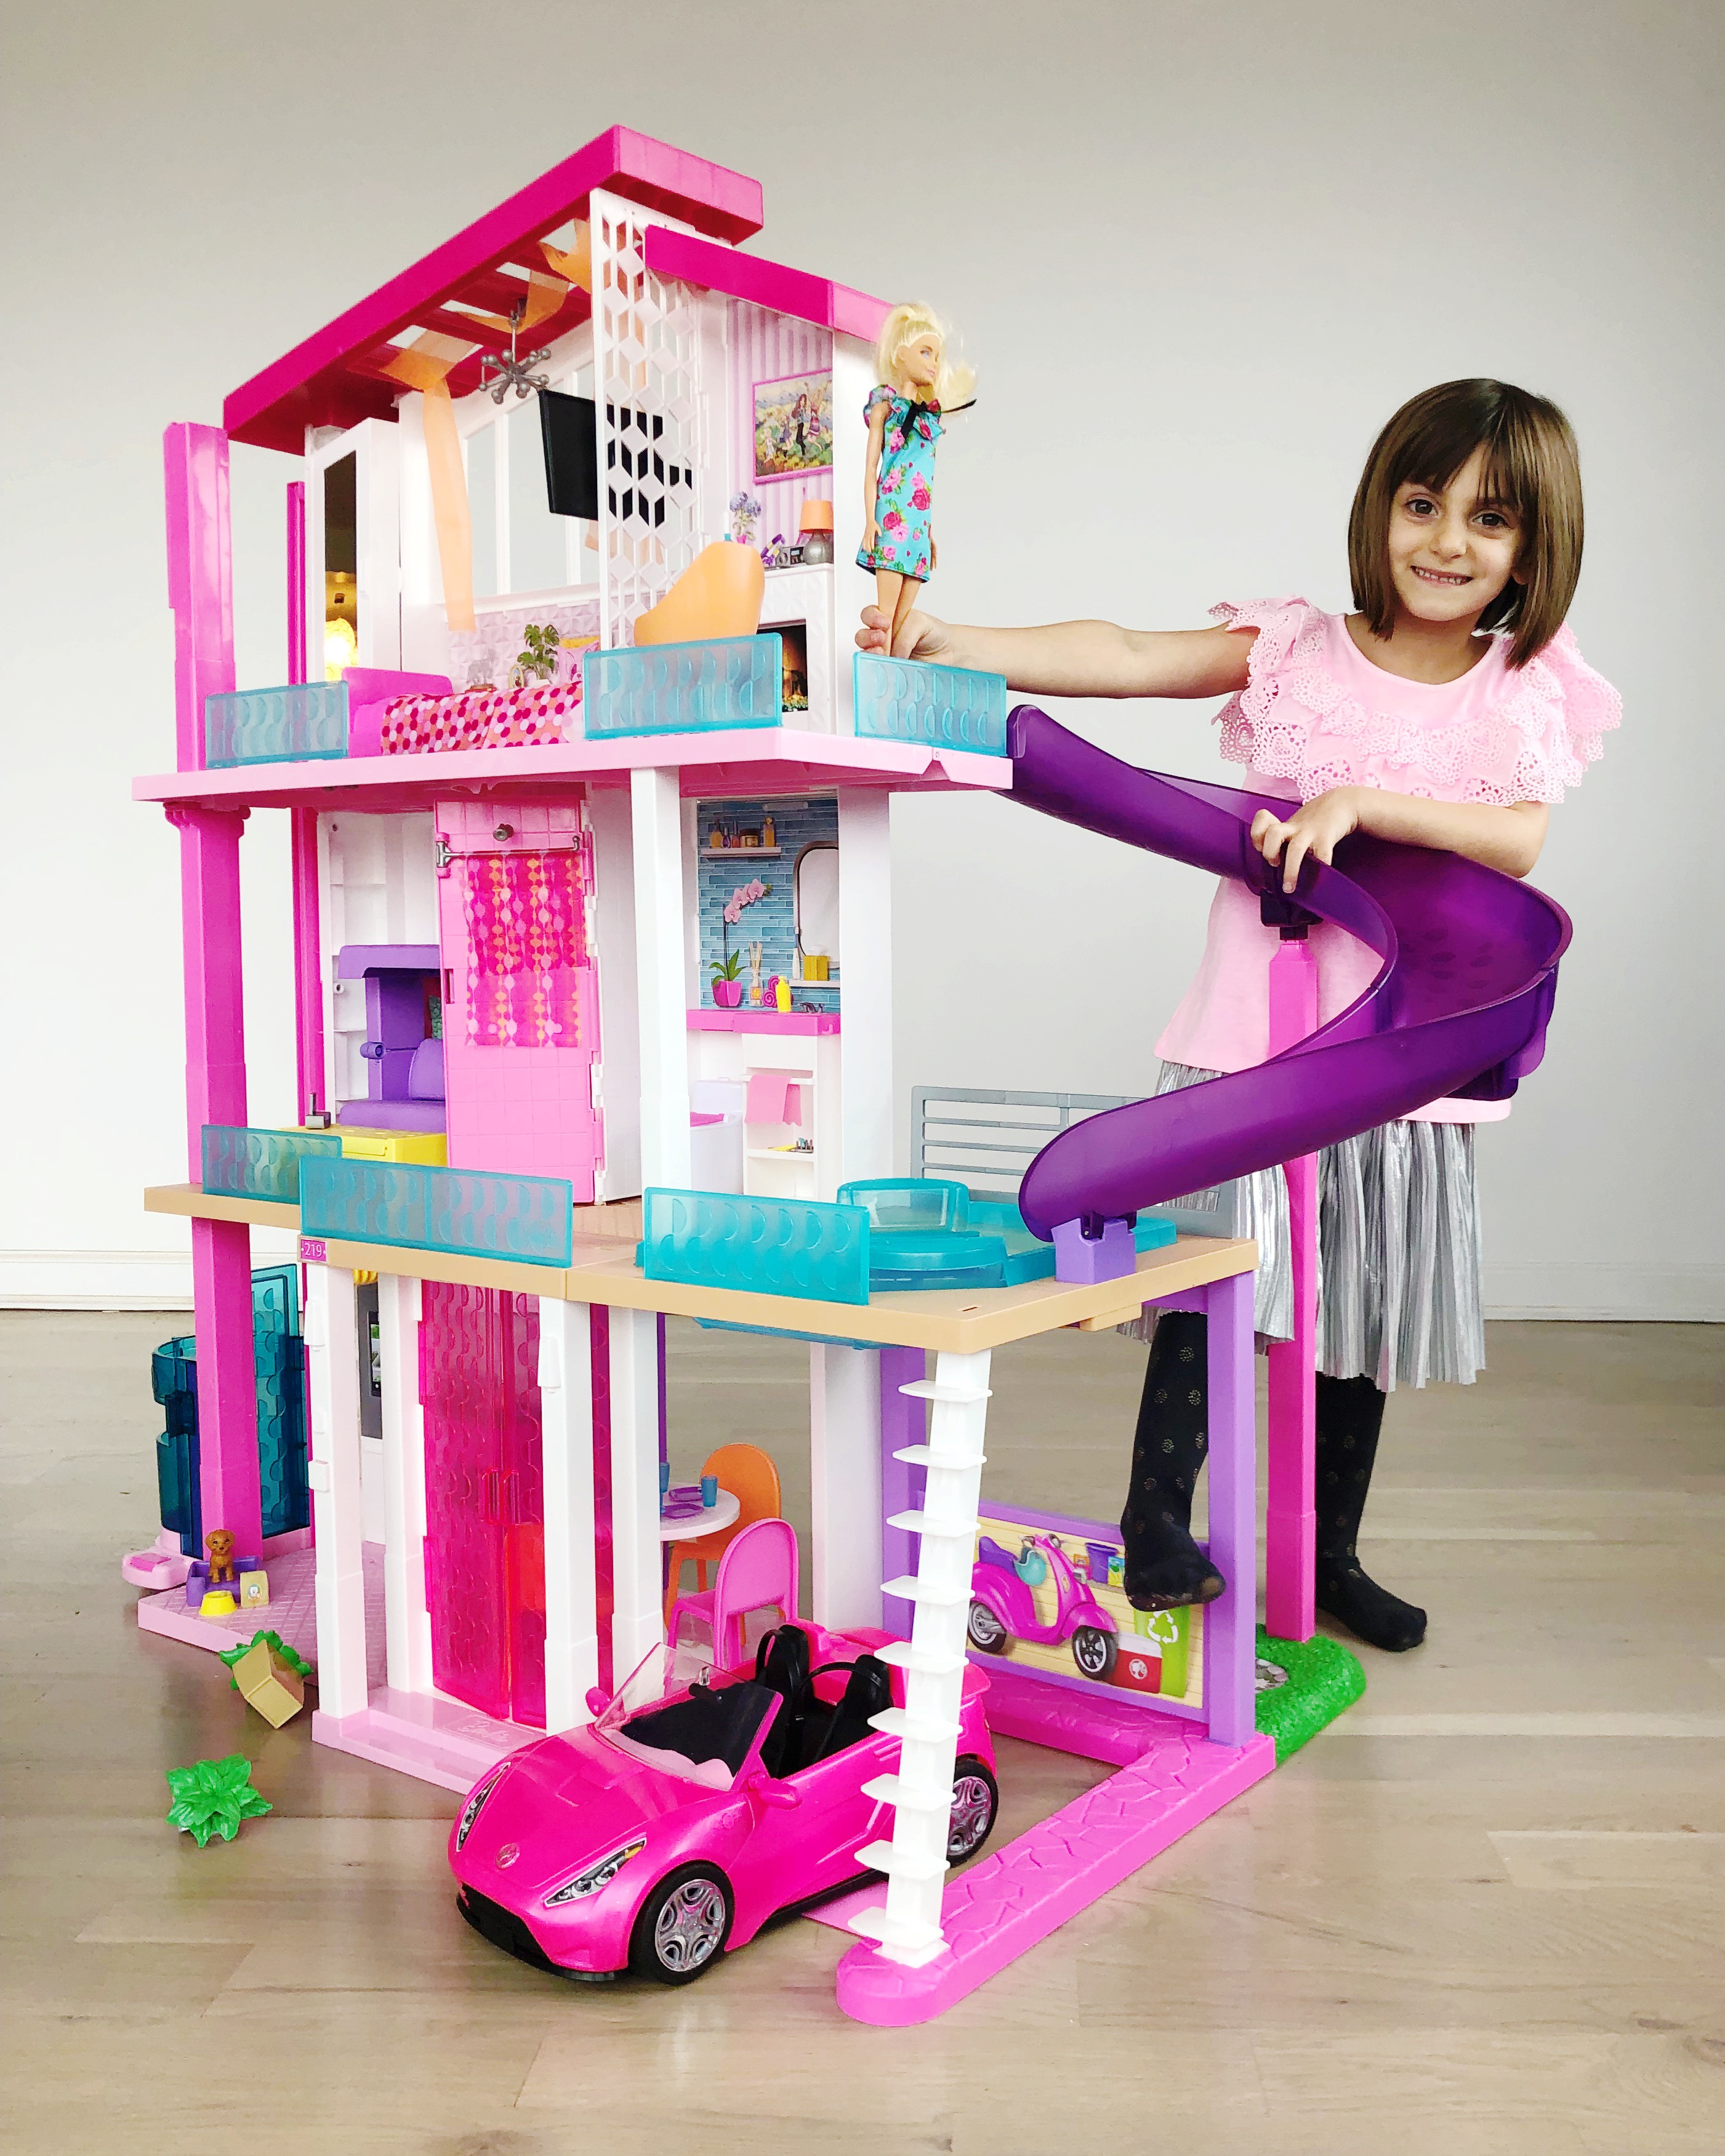 i want to watch barbie dream house